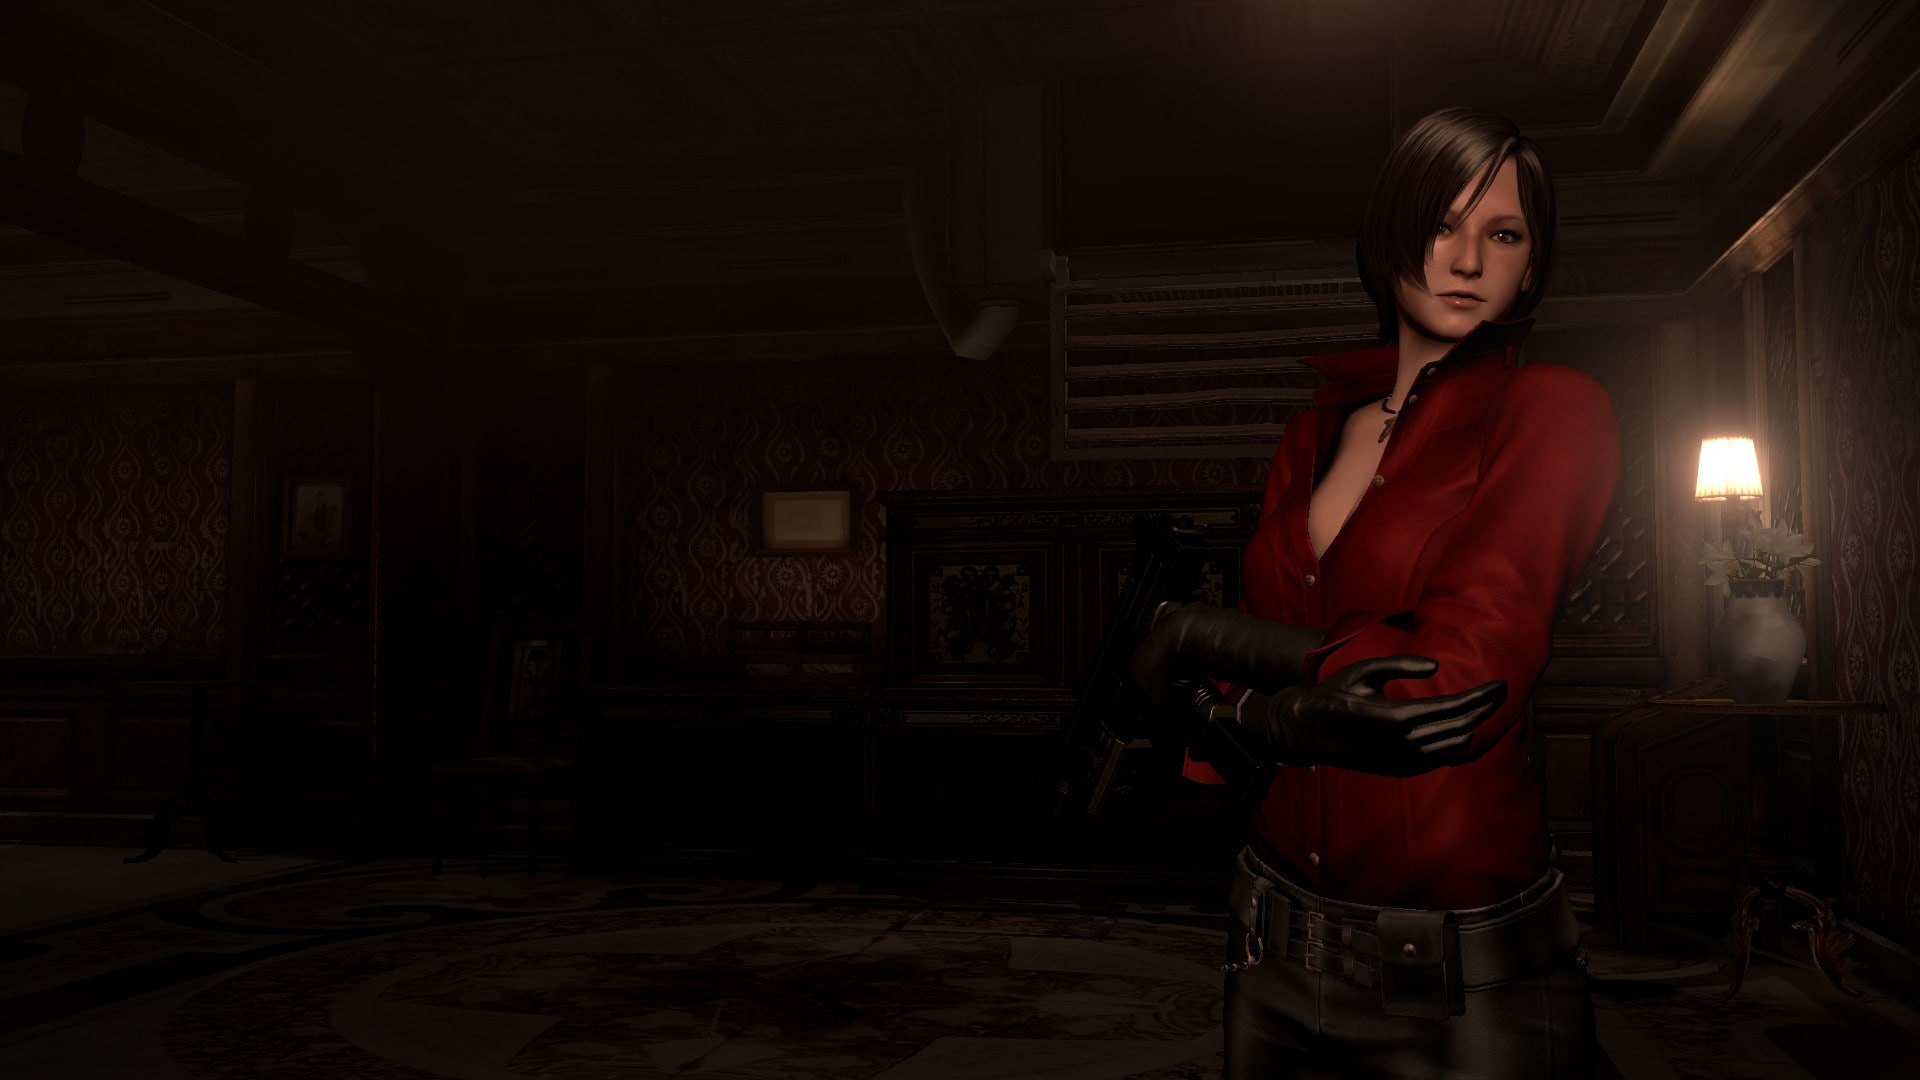 video games, Resident Evil 6, ada wong, standing, one person